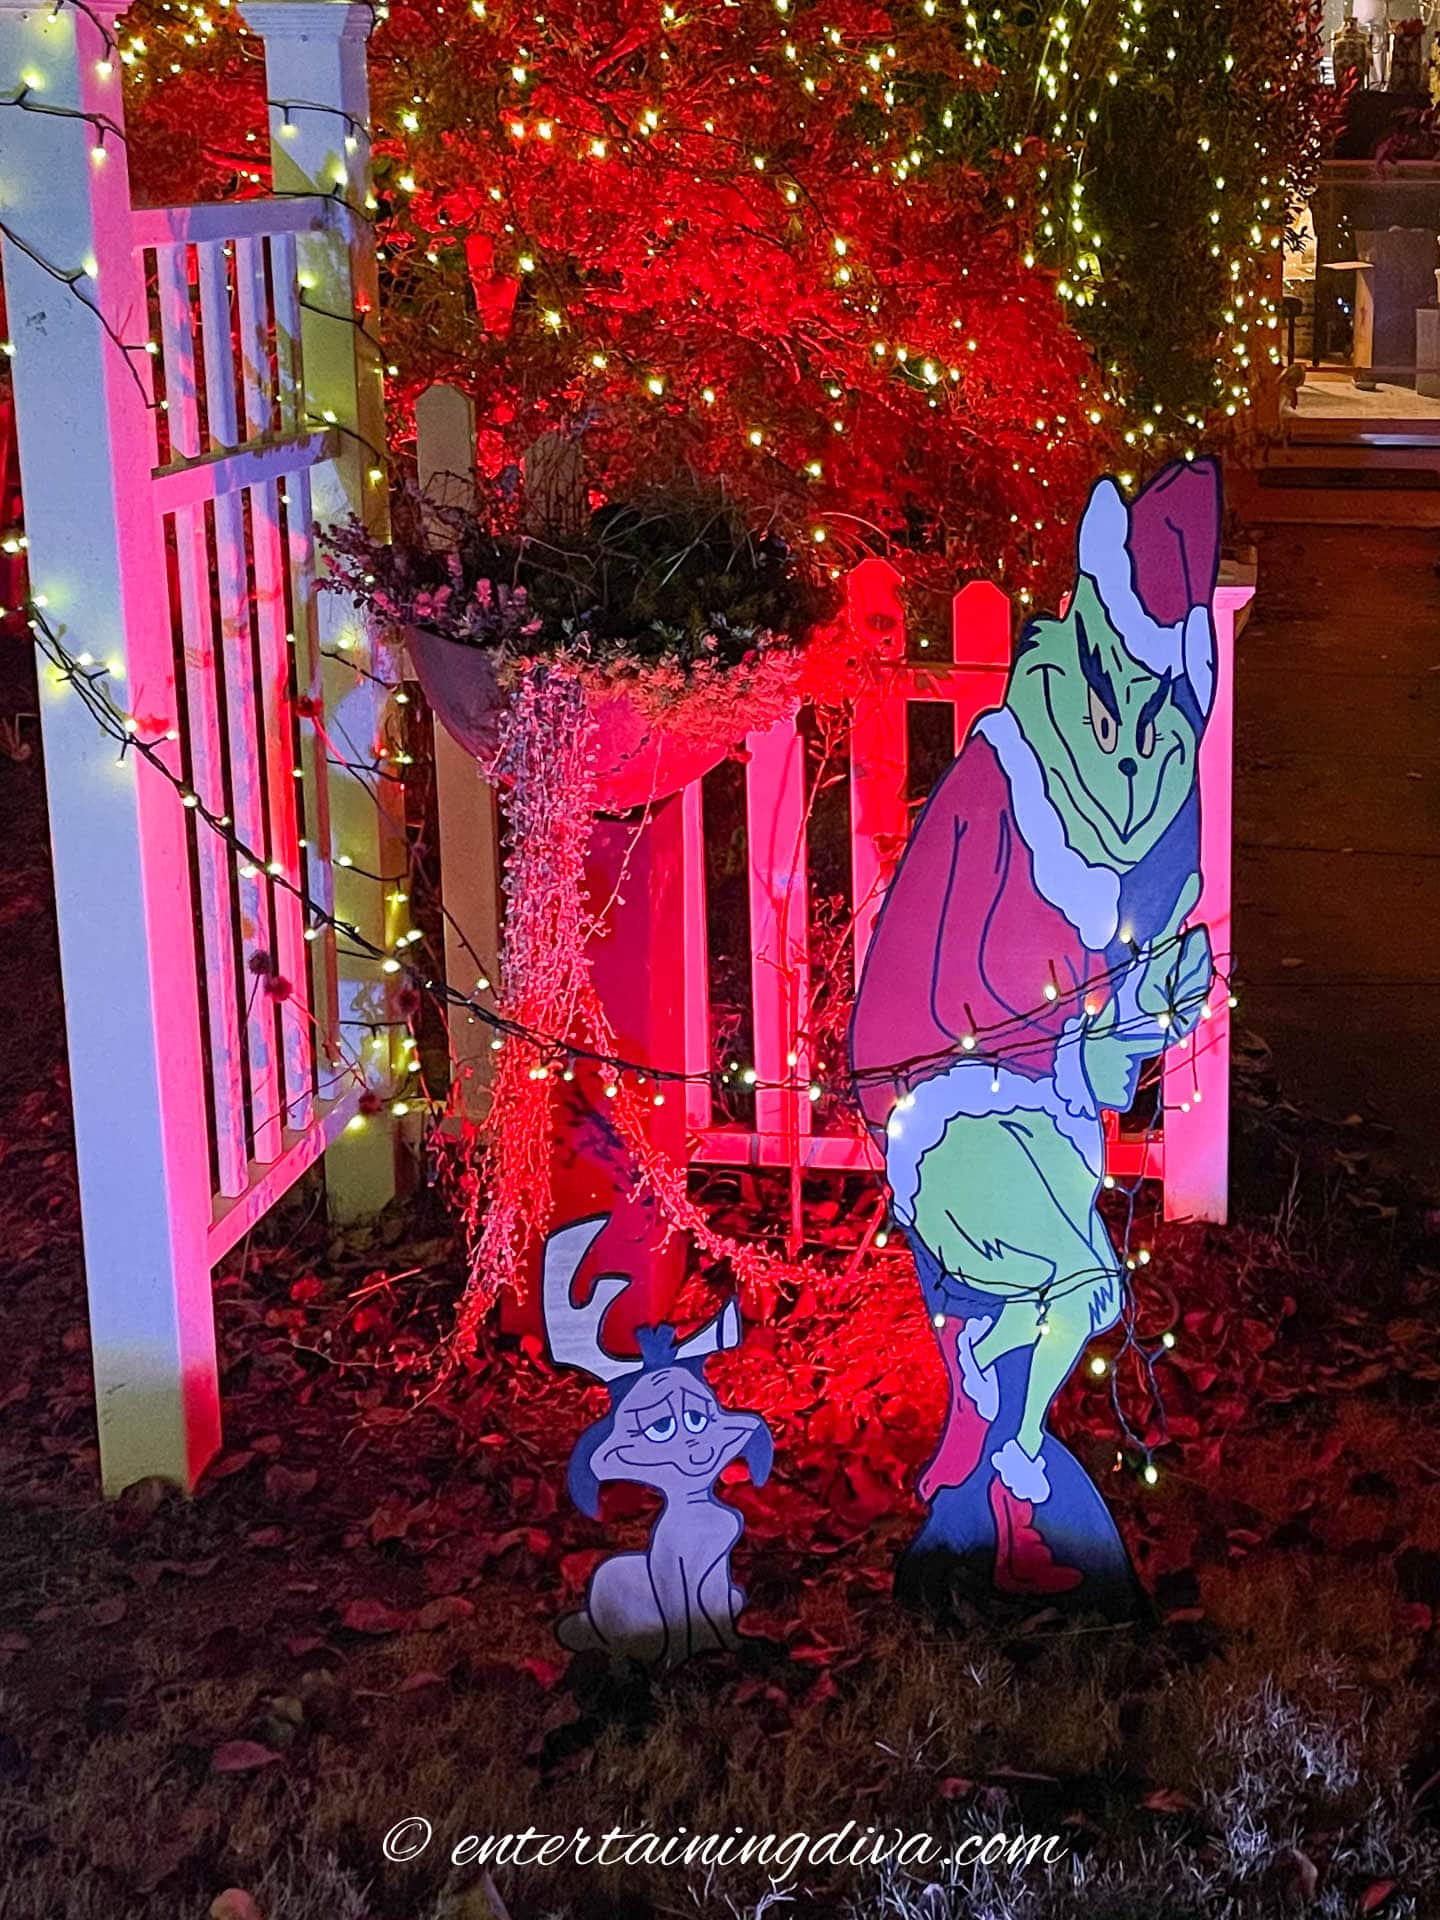 Grinch stealing lights off an arbor with Max by his side